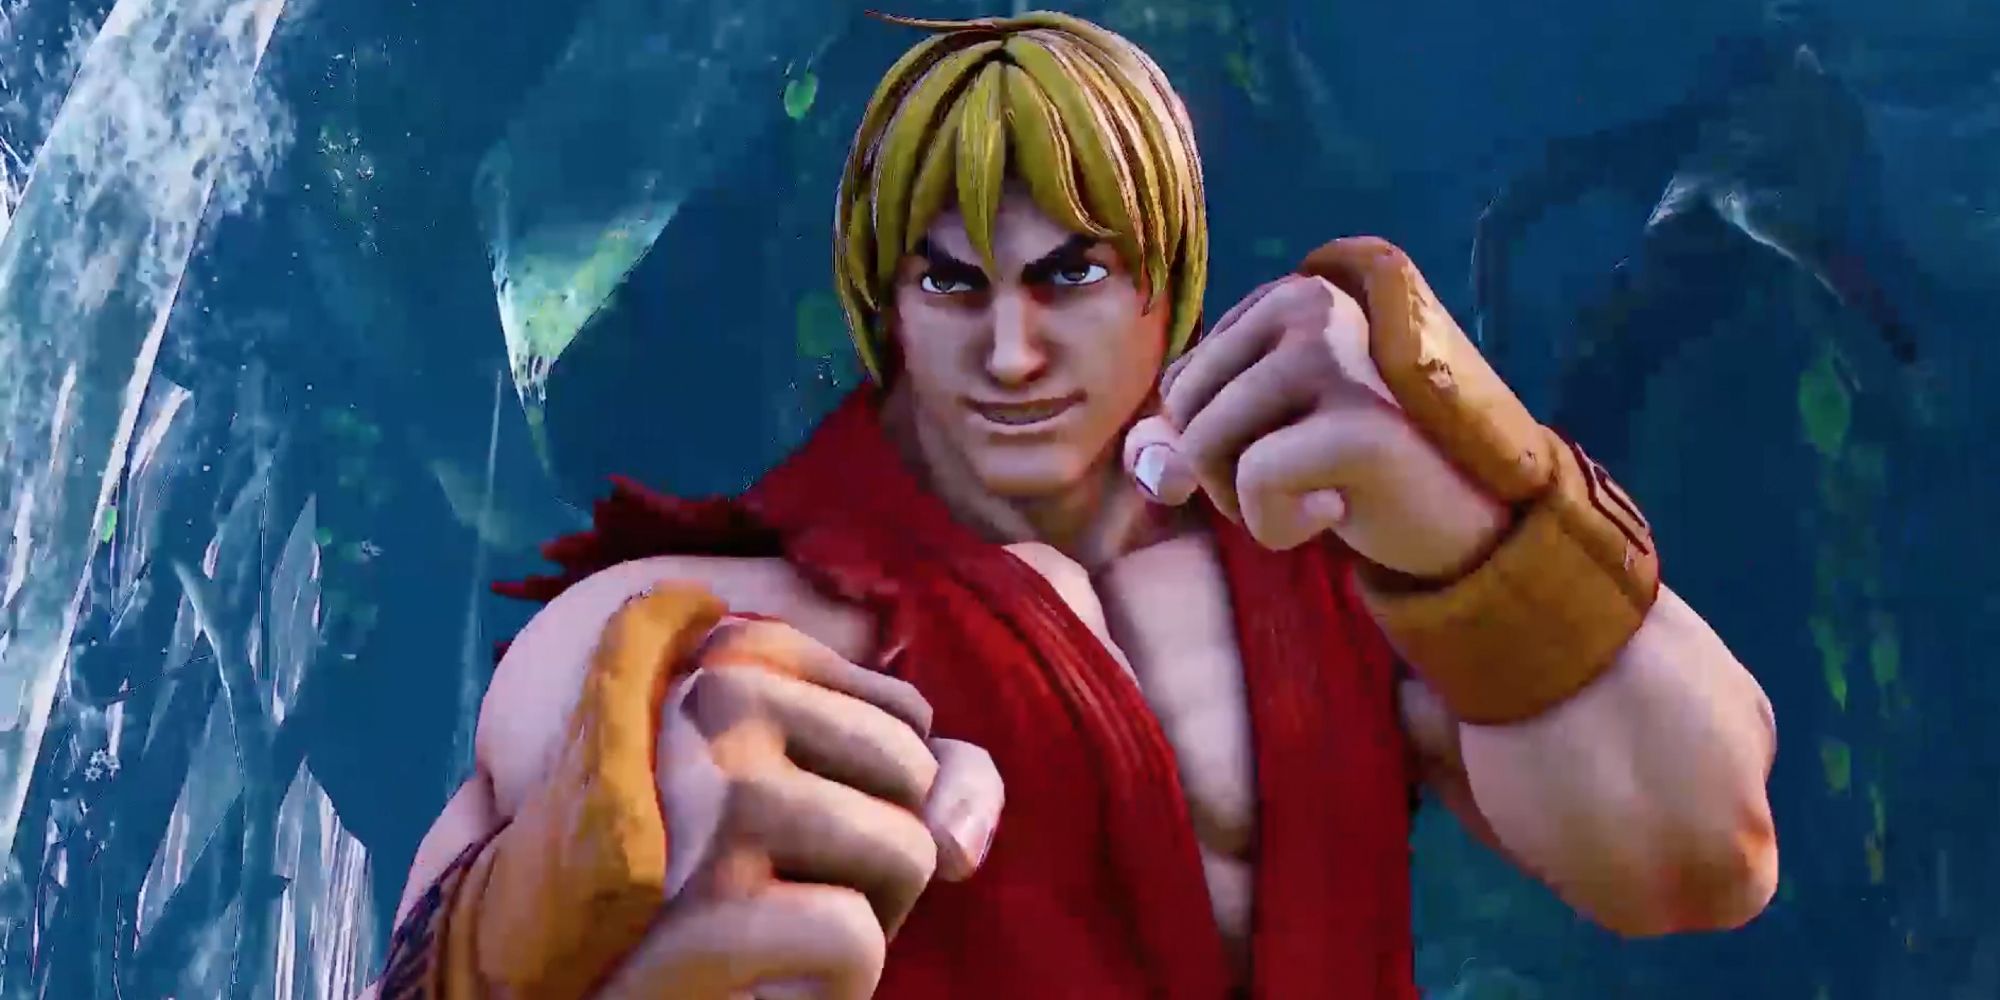 Iconic Fighting Stances in Video Games - Ken Masters - Player prepares to fight his opponent with zeal